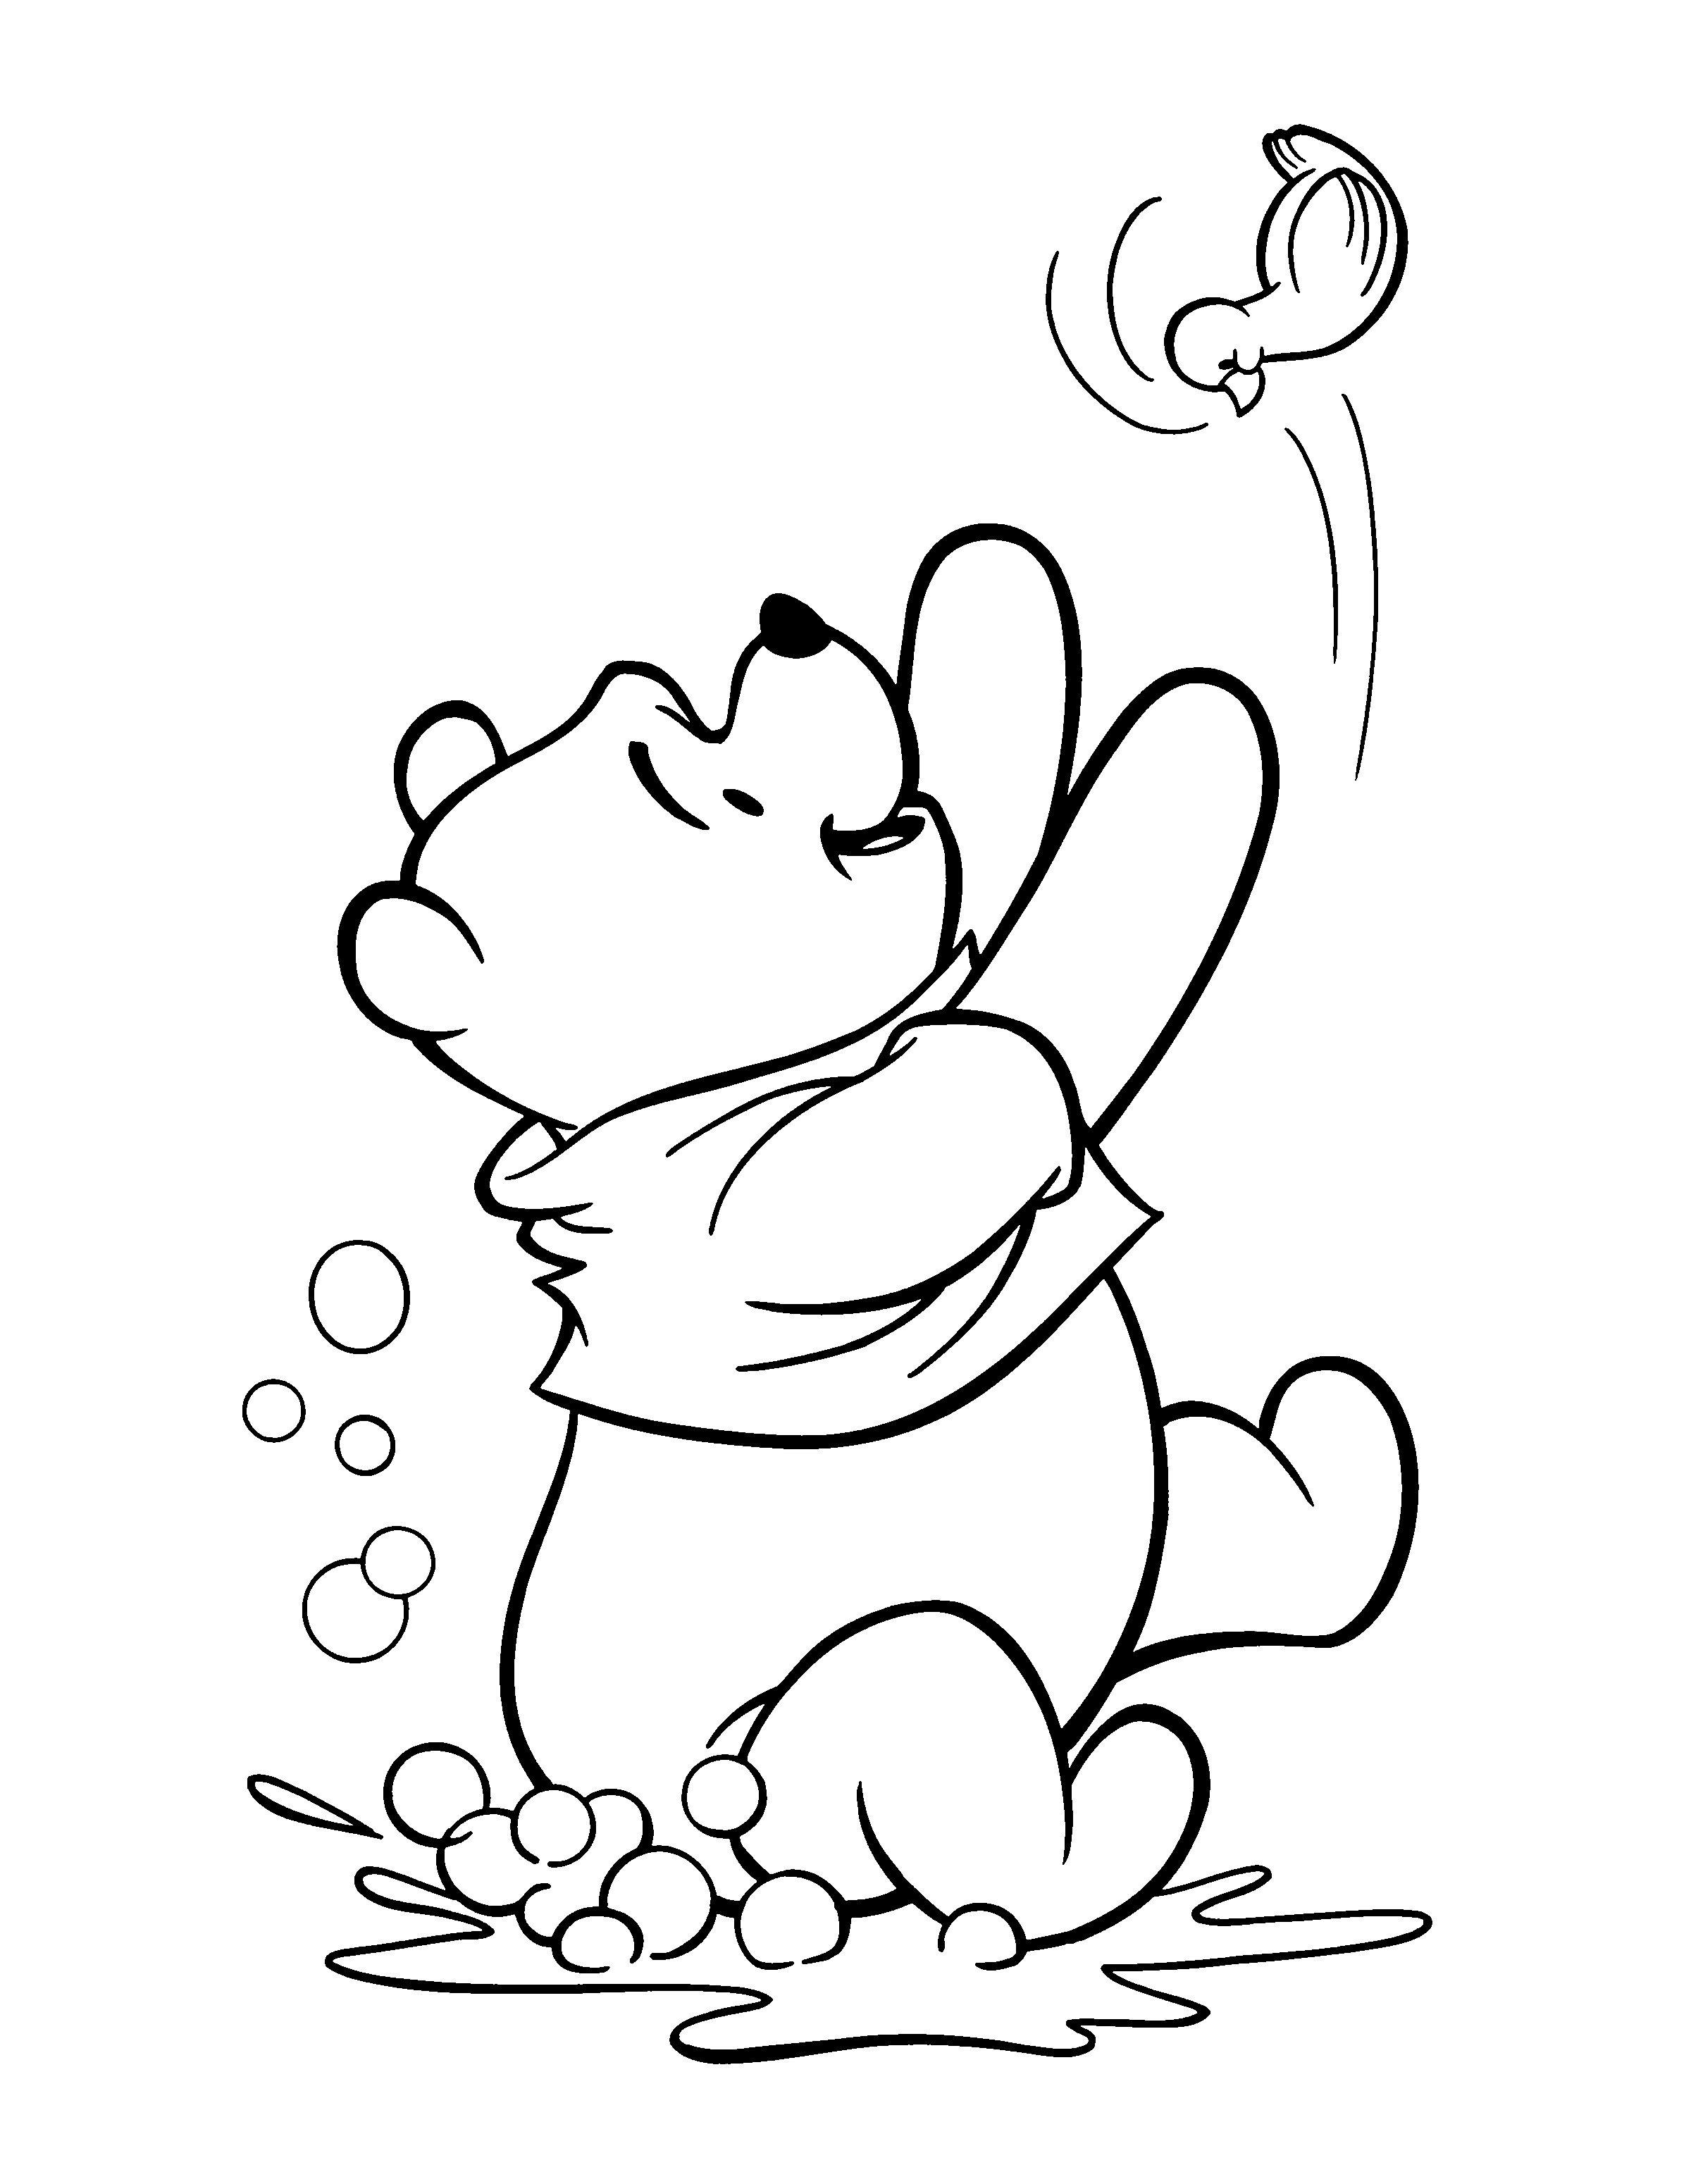 animated-coloring-pages-winnie-the-pooh-image-0118